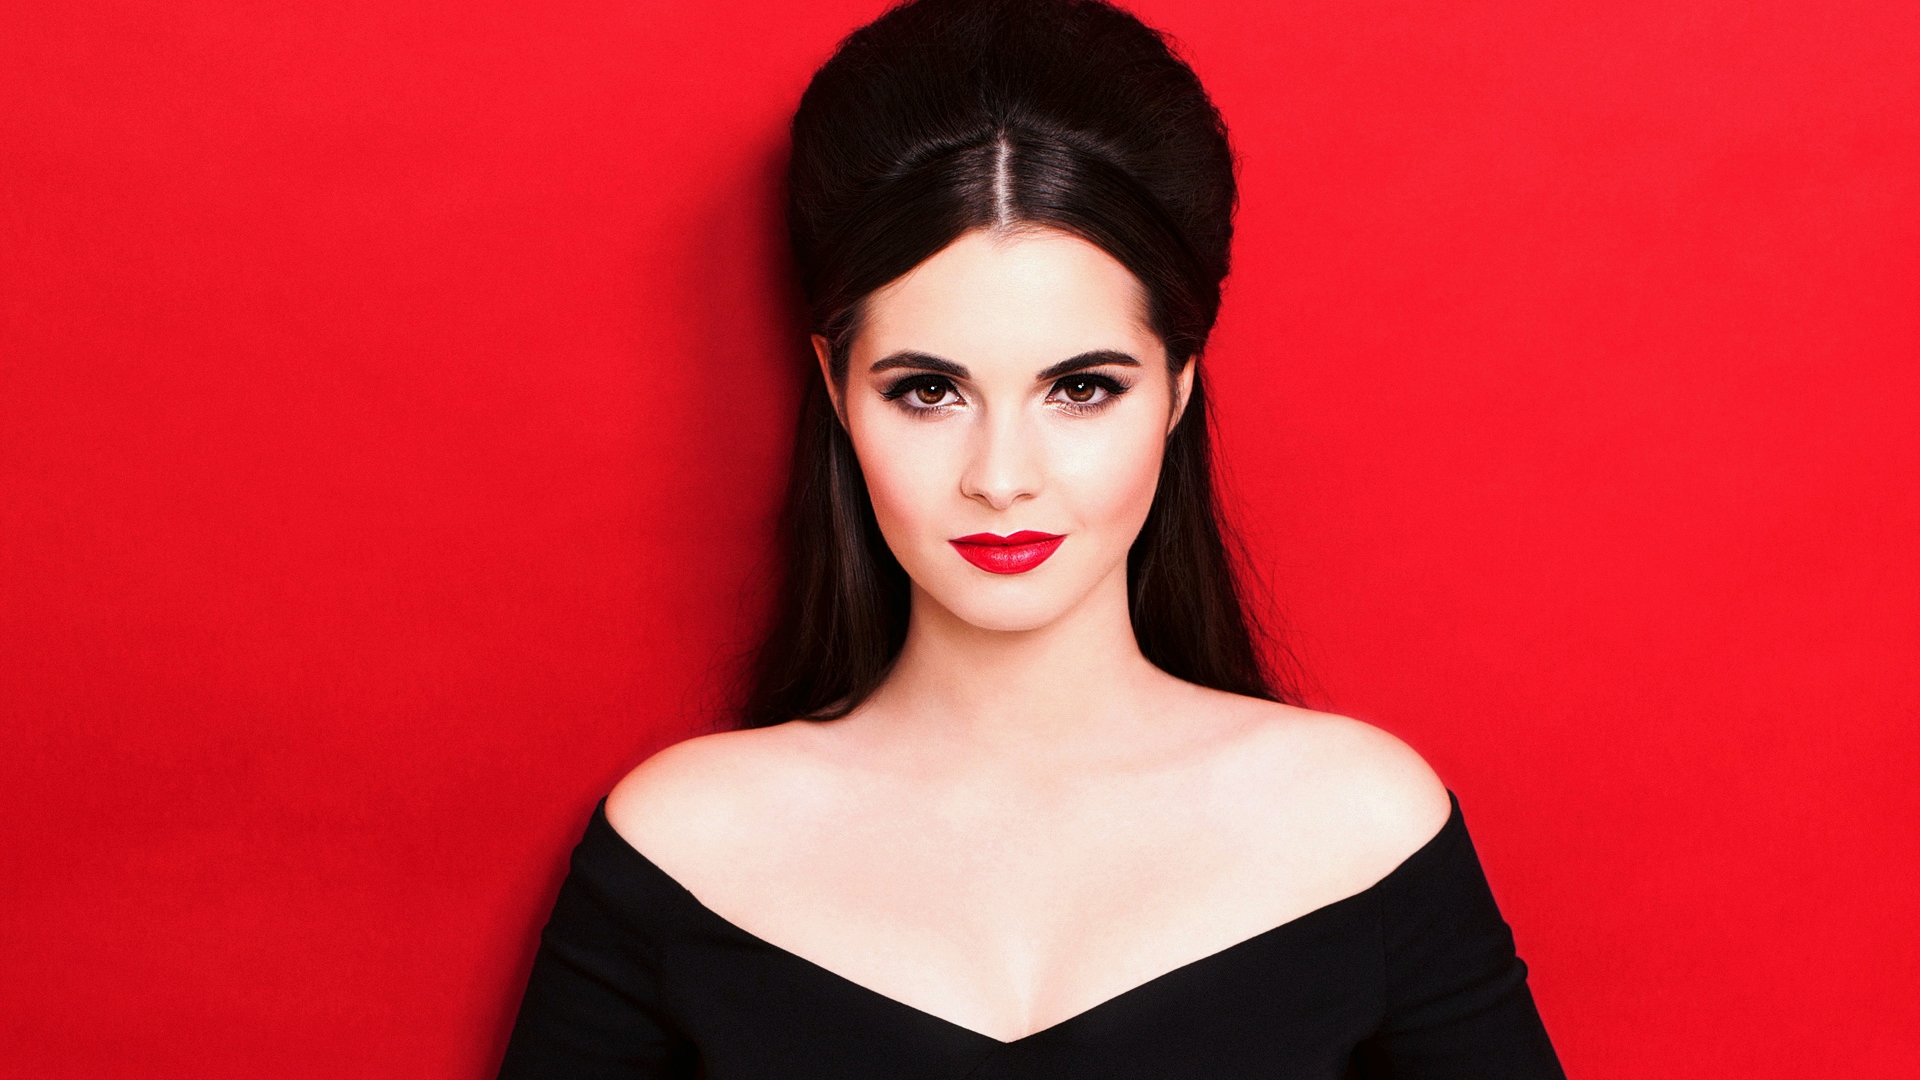 Free photo Portrait of dark-haired Vanessa Marano on a red background